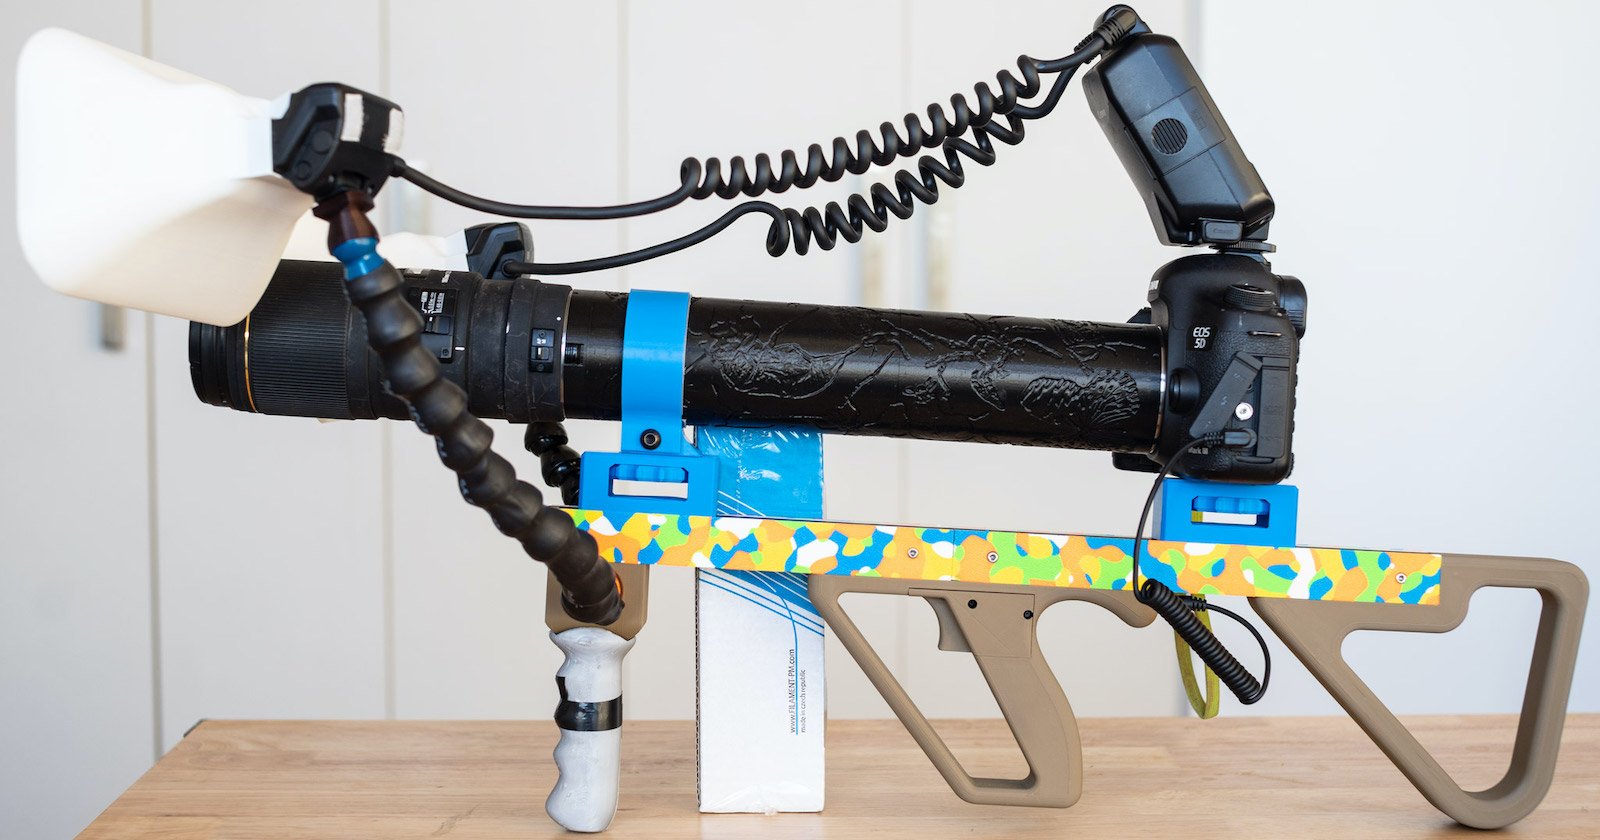 This Guy Created a Custom Rifle-Style Grip for His Crazy 5x Macro Rig